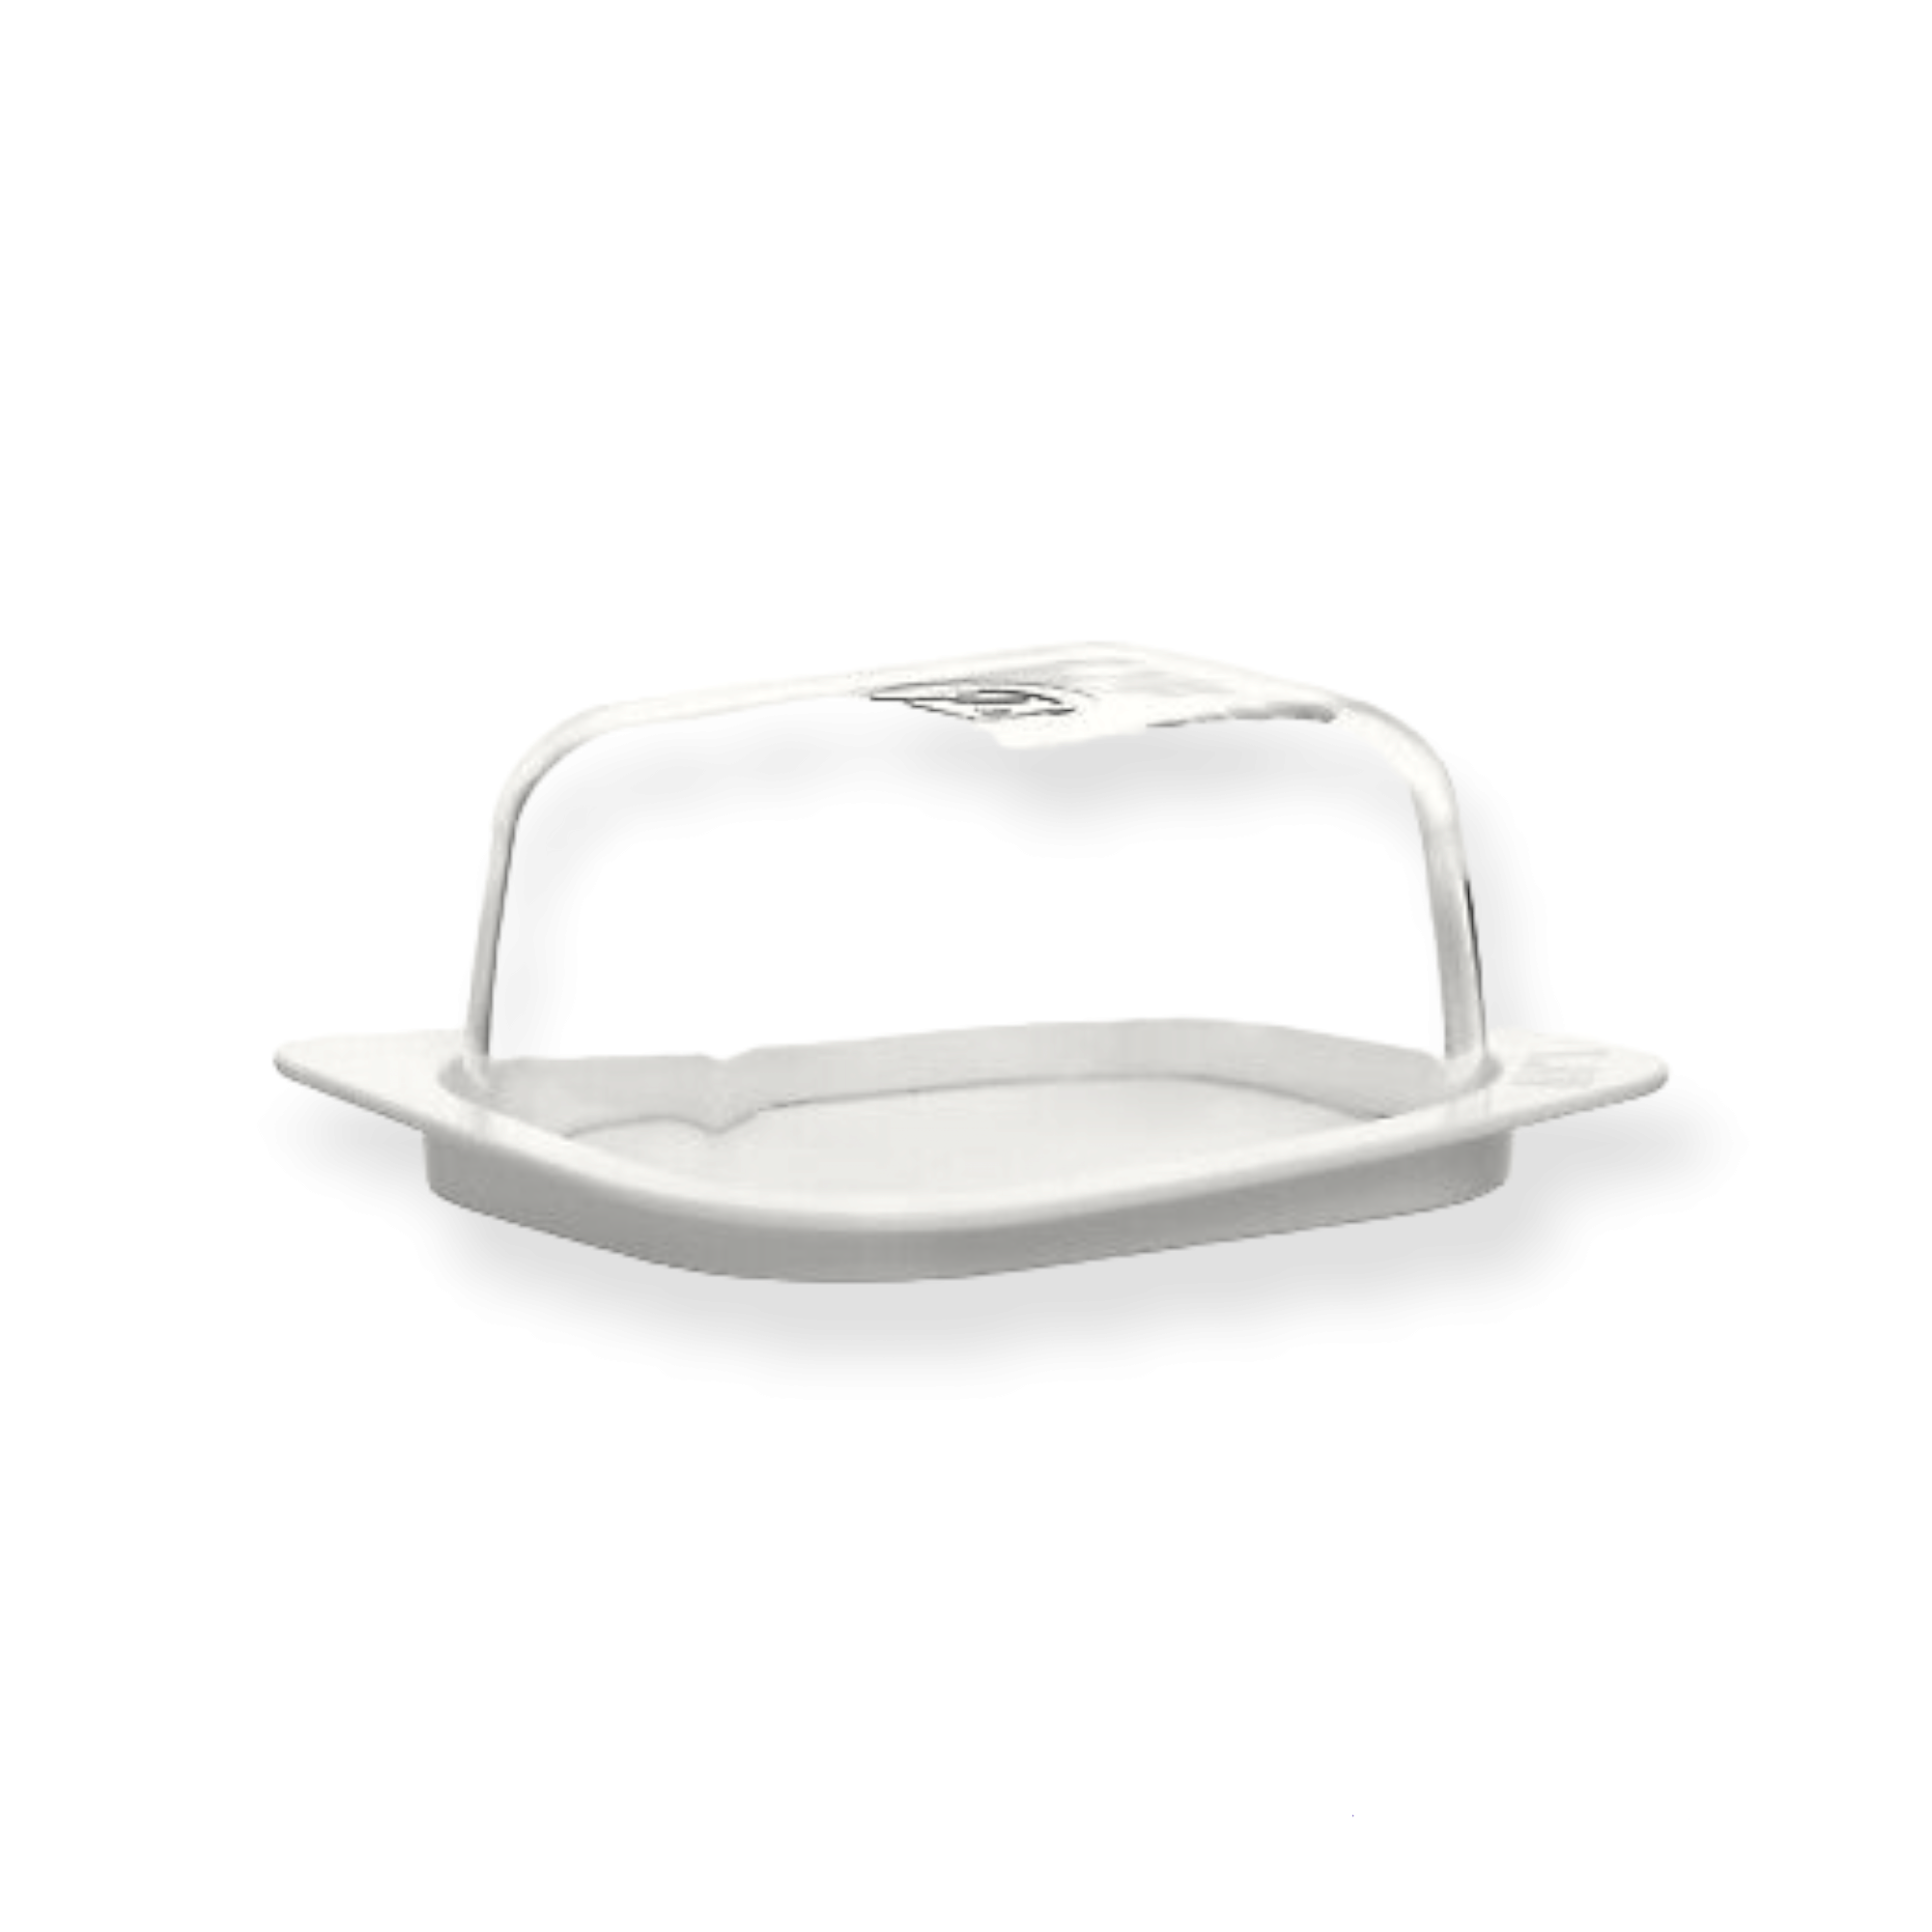 LAV Glass Butter Dish - Container For Butter 450ml SGN348